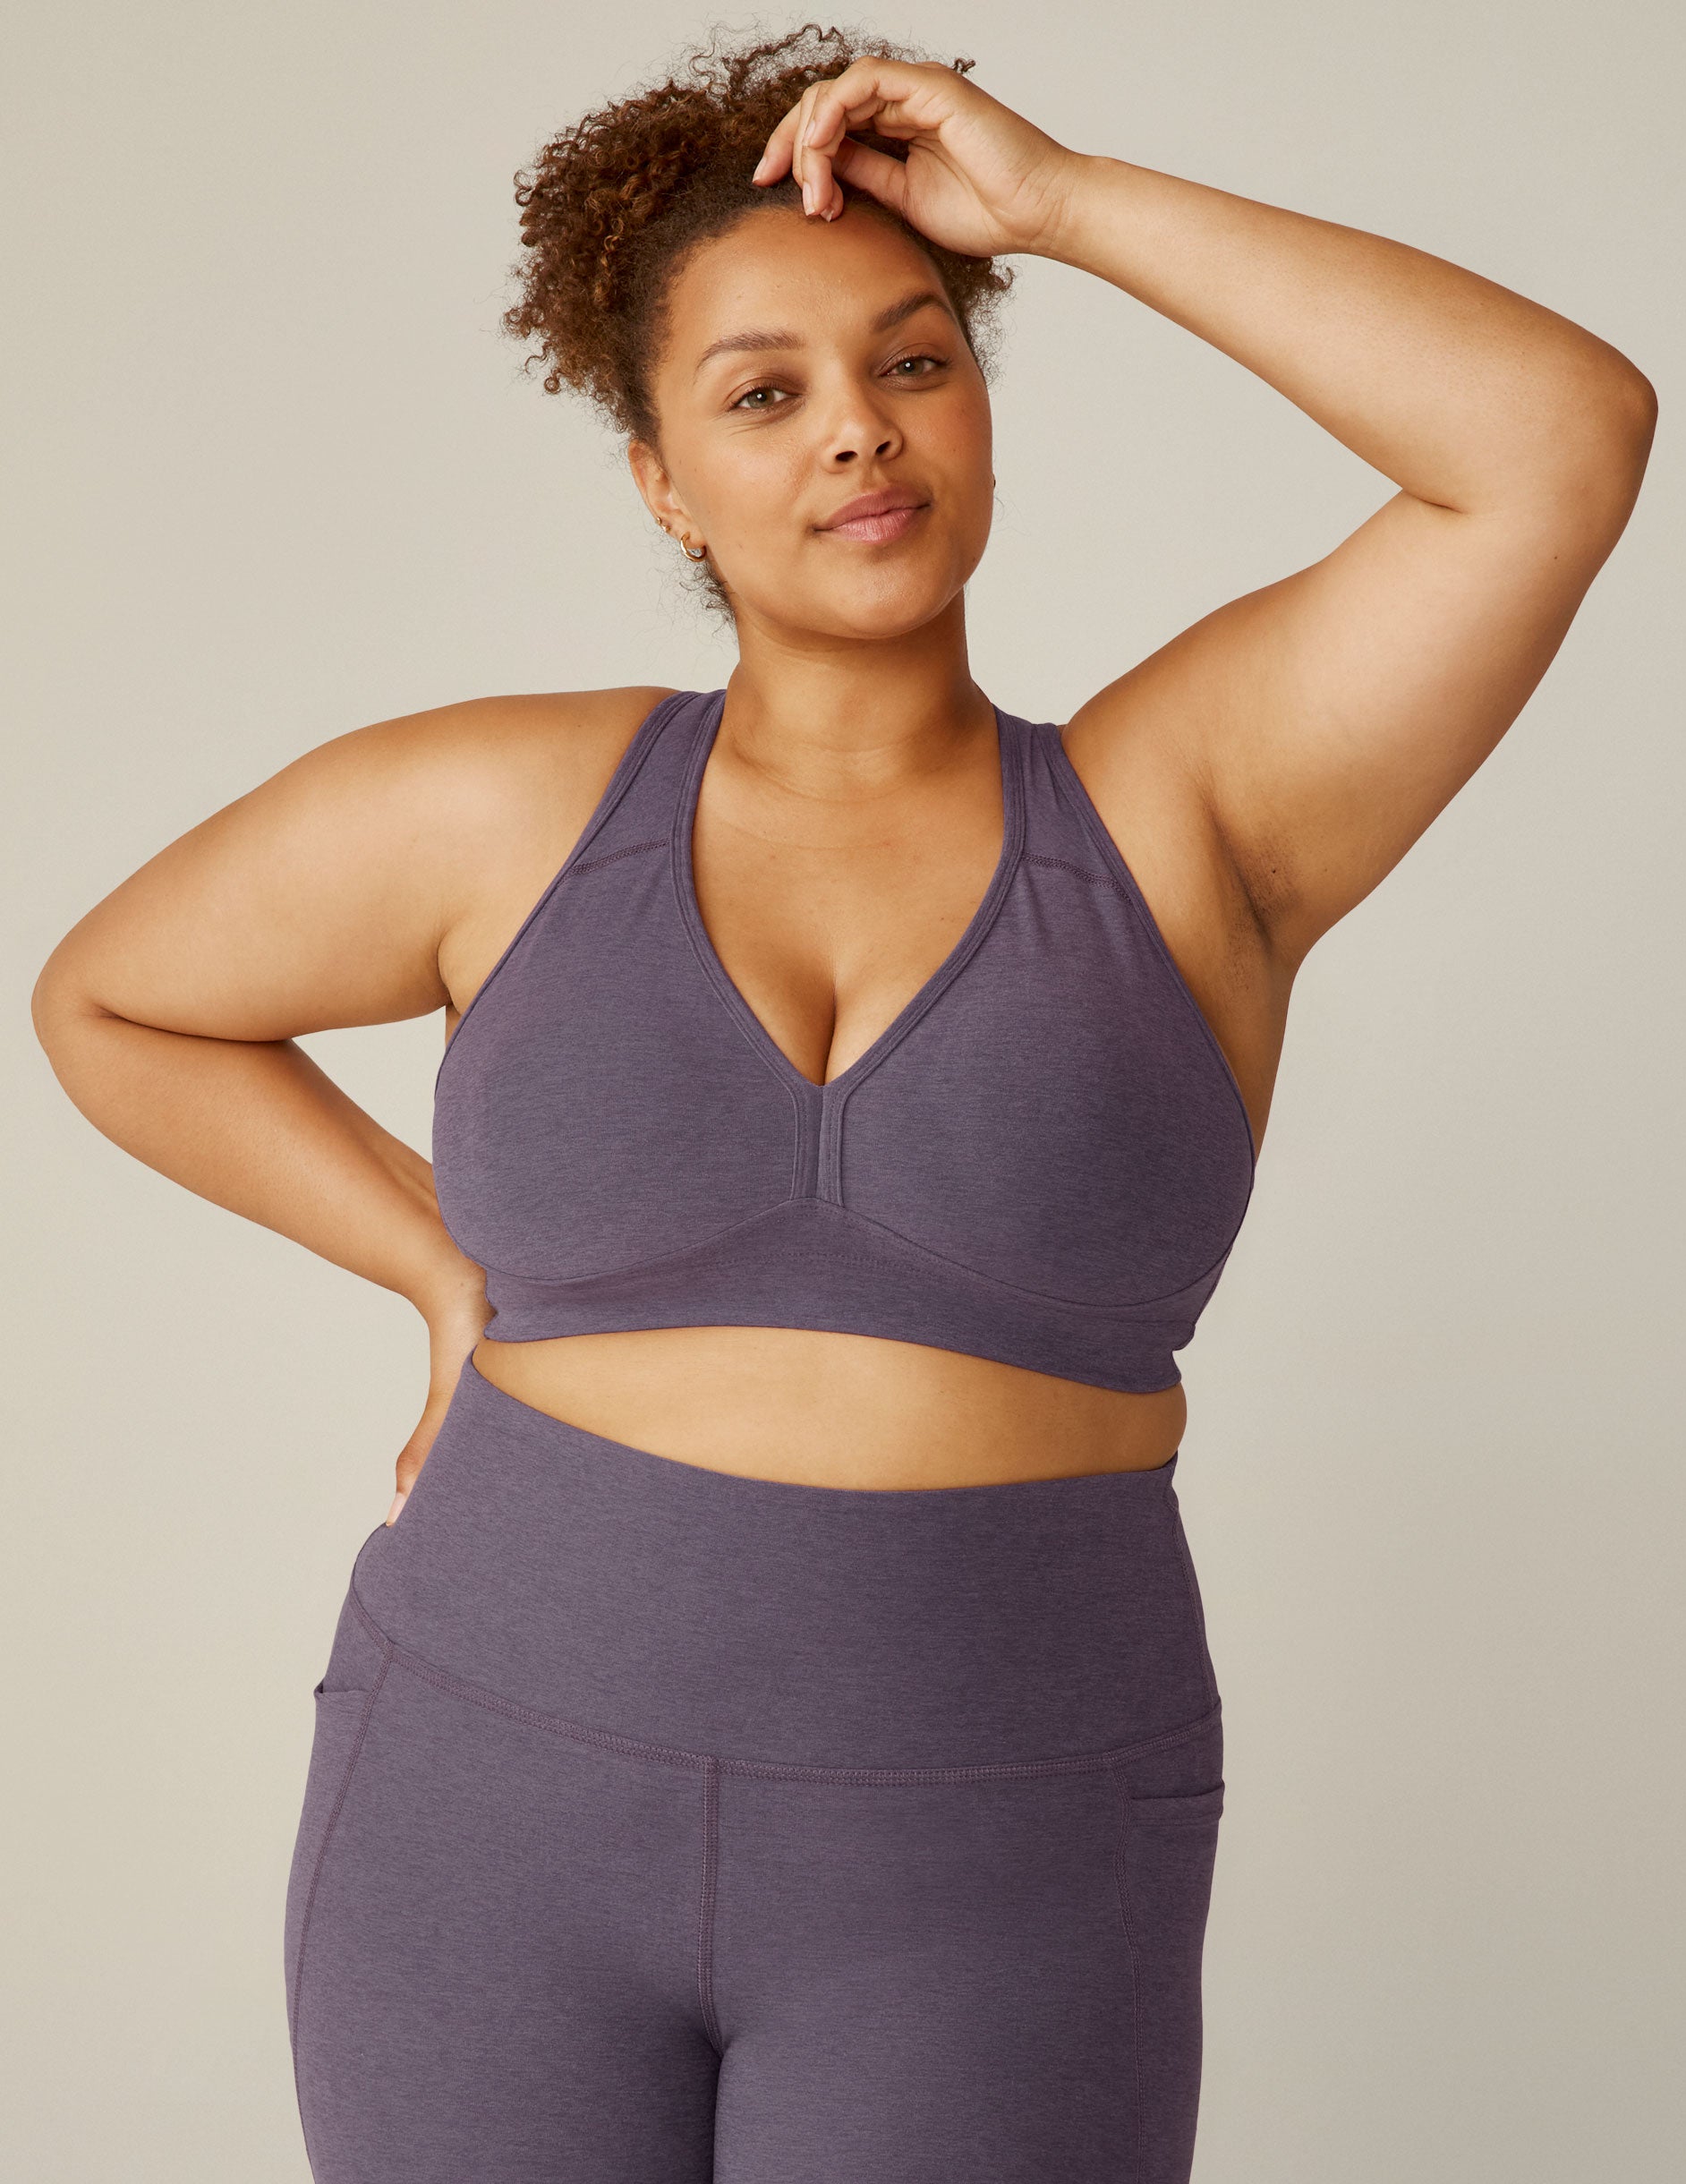 Exclusions Purple V-Neck Sports Bras.